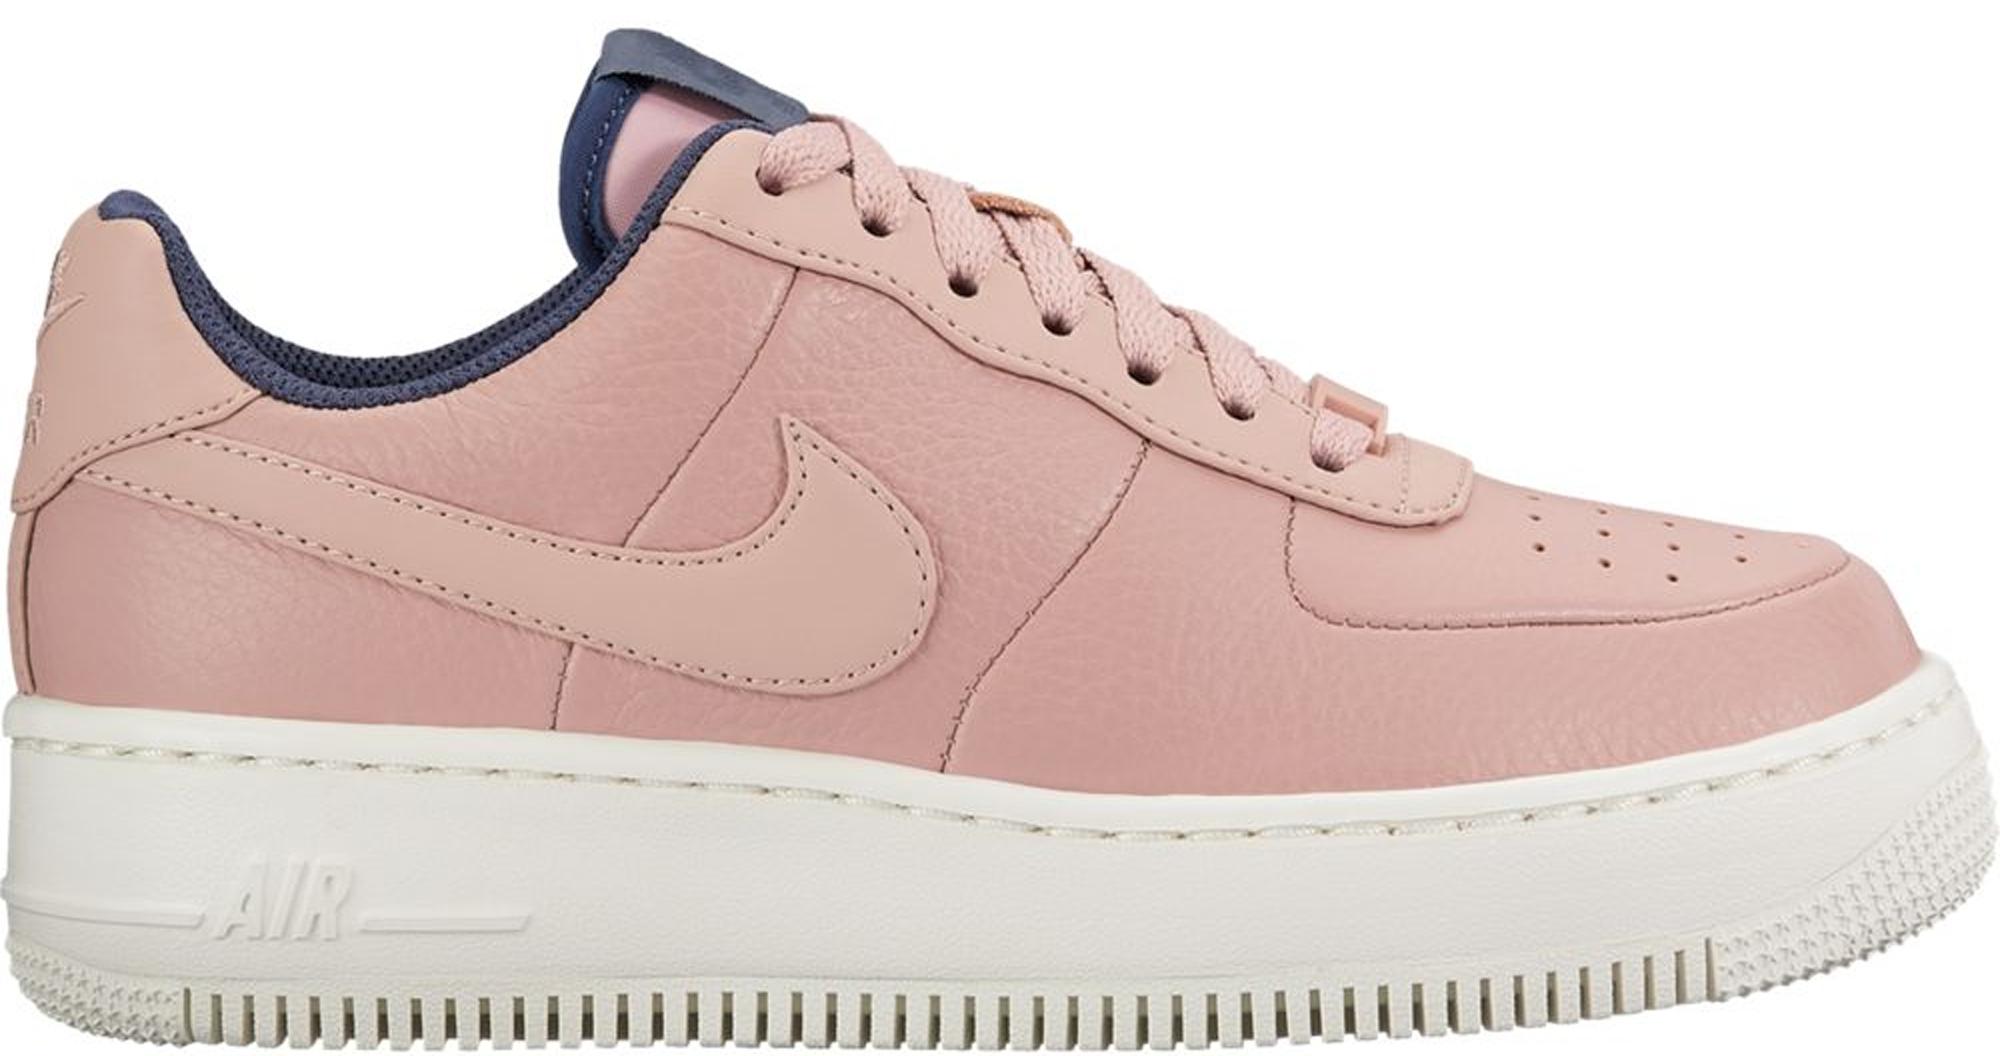 particle pink air force 1